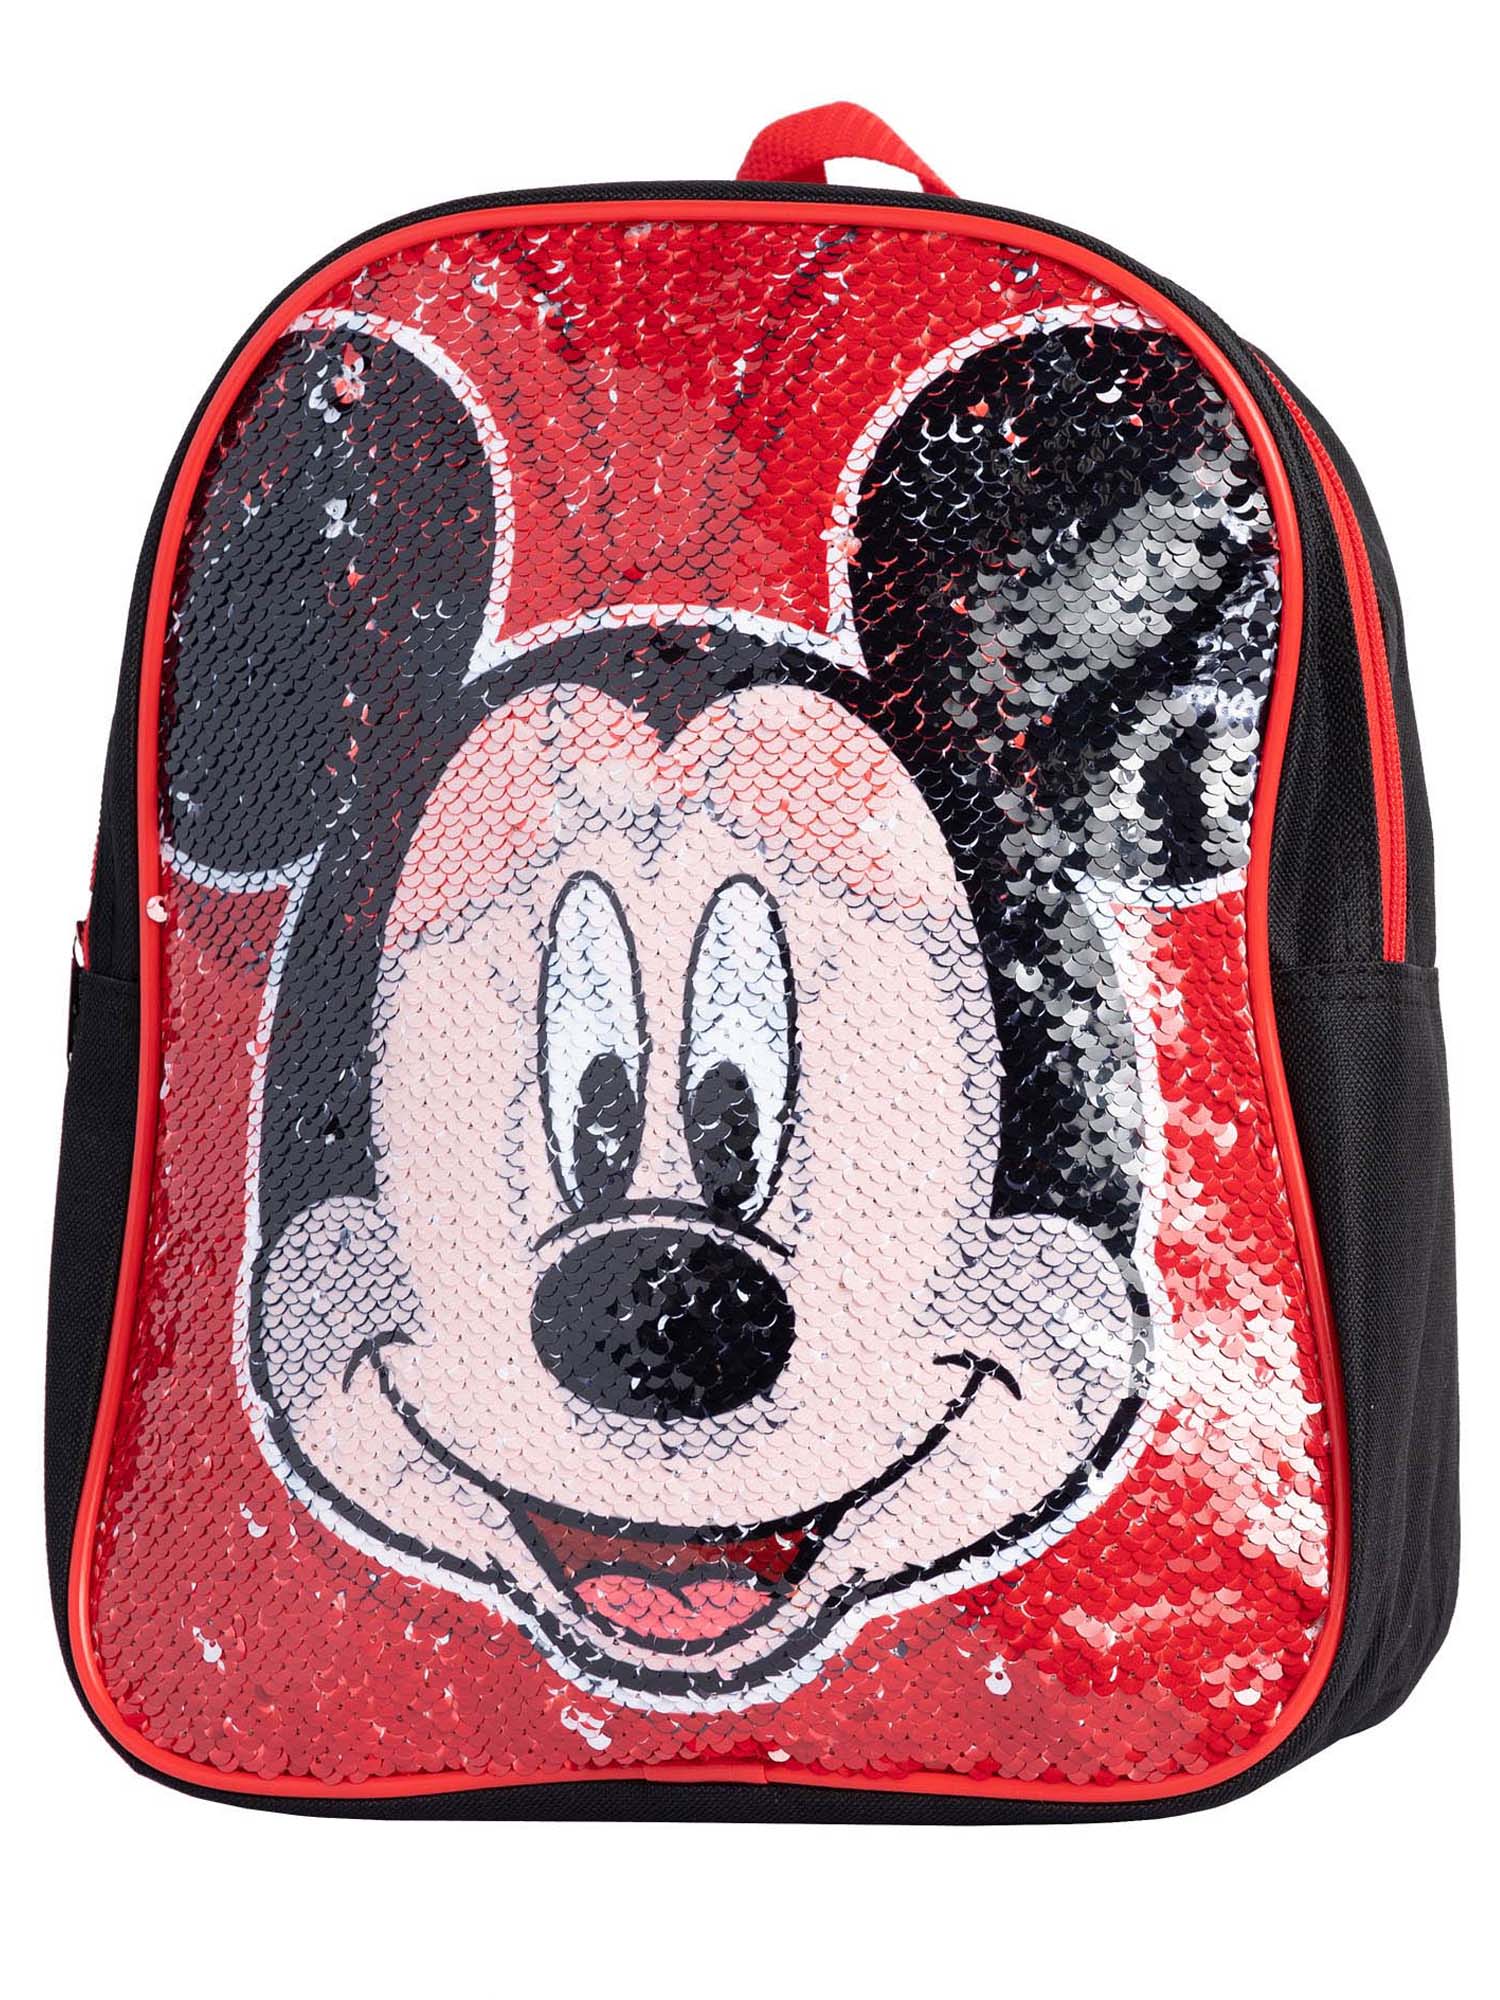 Disney Mickey & Minnie Mouse Backpack 12" Reversible Sequins Black Red - image 2 of 4